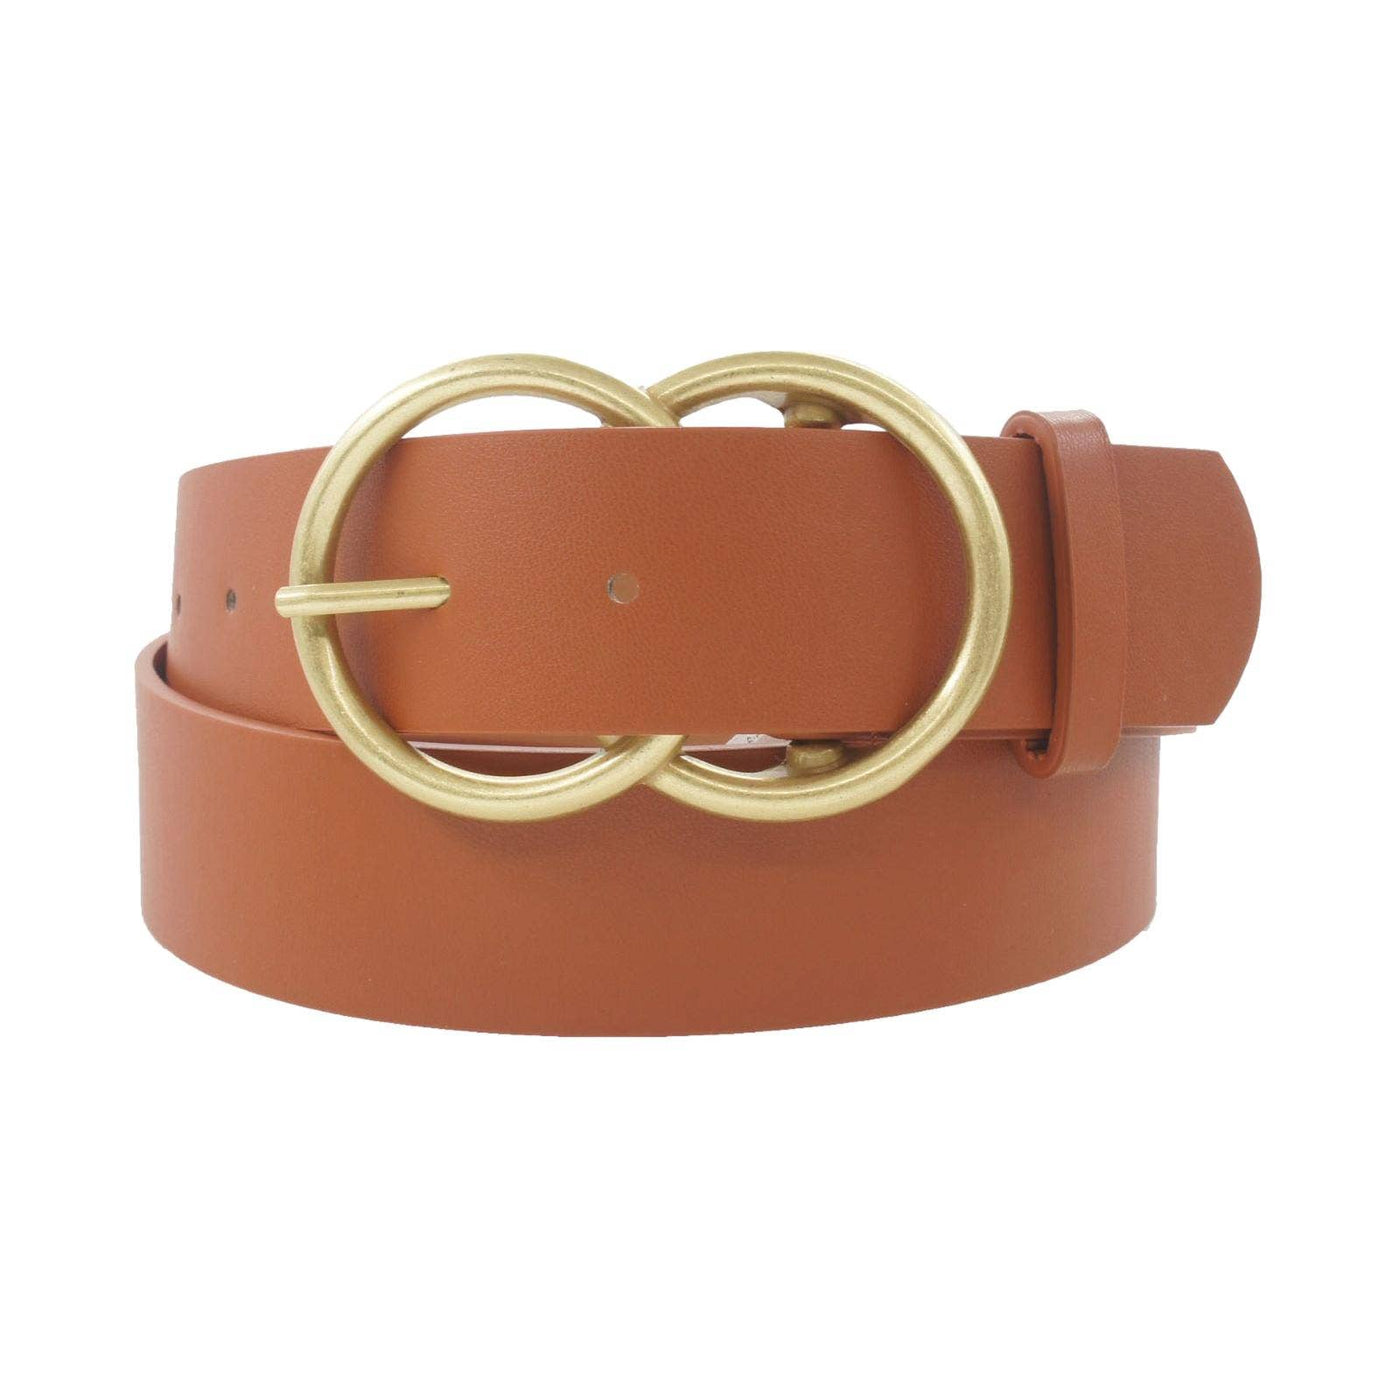 The Datable Double Ring Belt